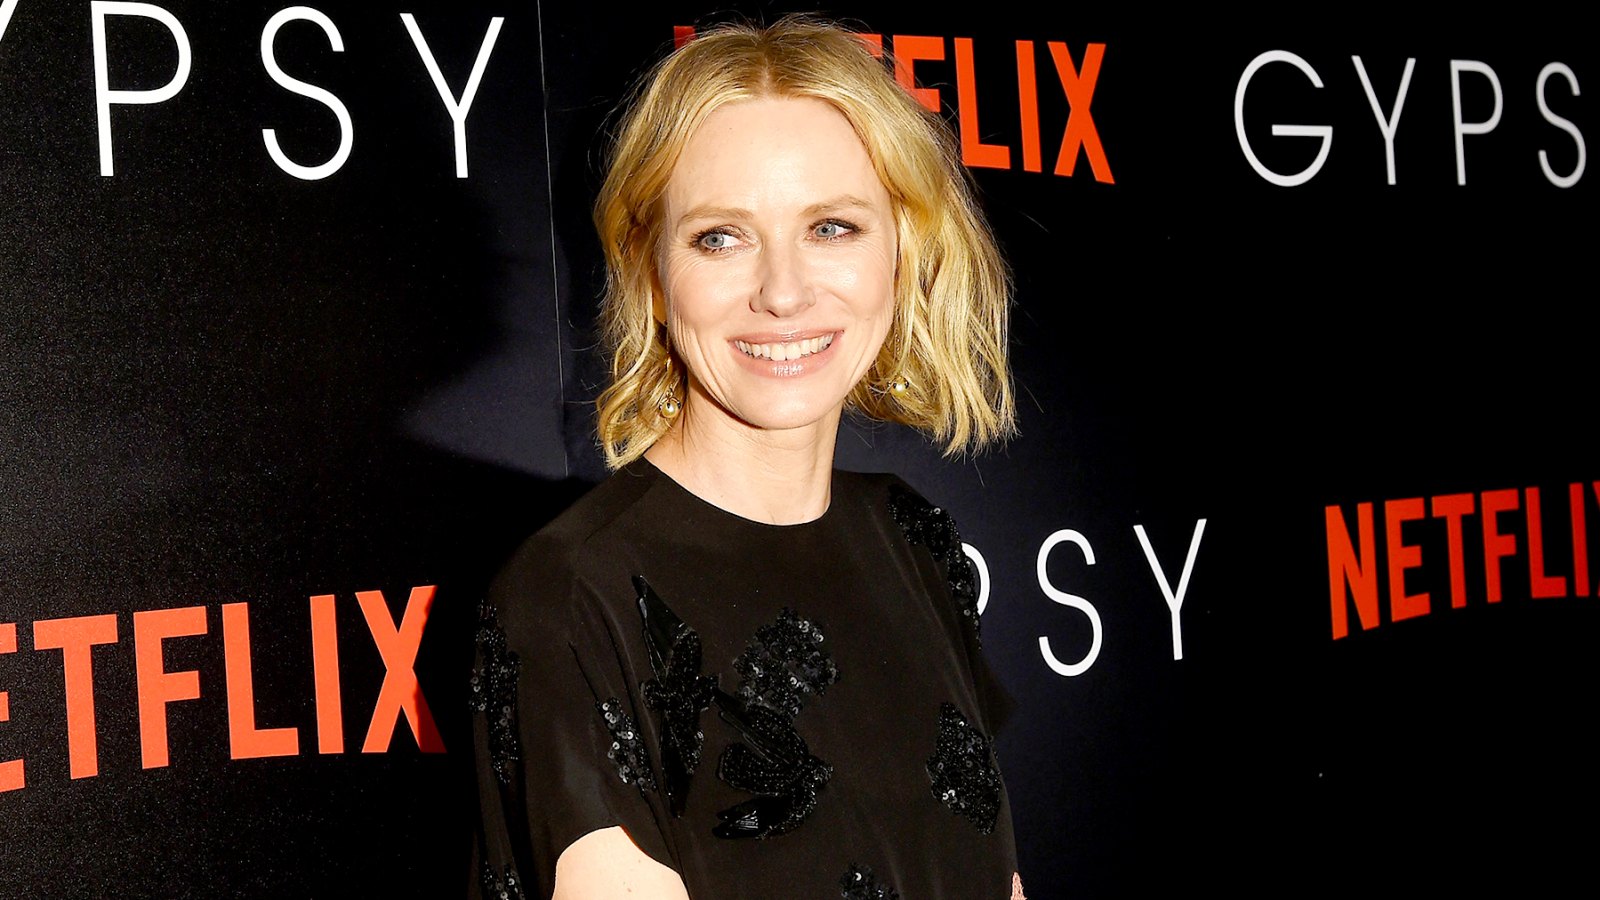 Naomi Watts attends a special screening of 'Gypsy' hosted by Netflix at Public Hotel on June 29, 2017 in New York City.